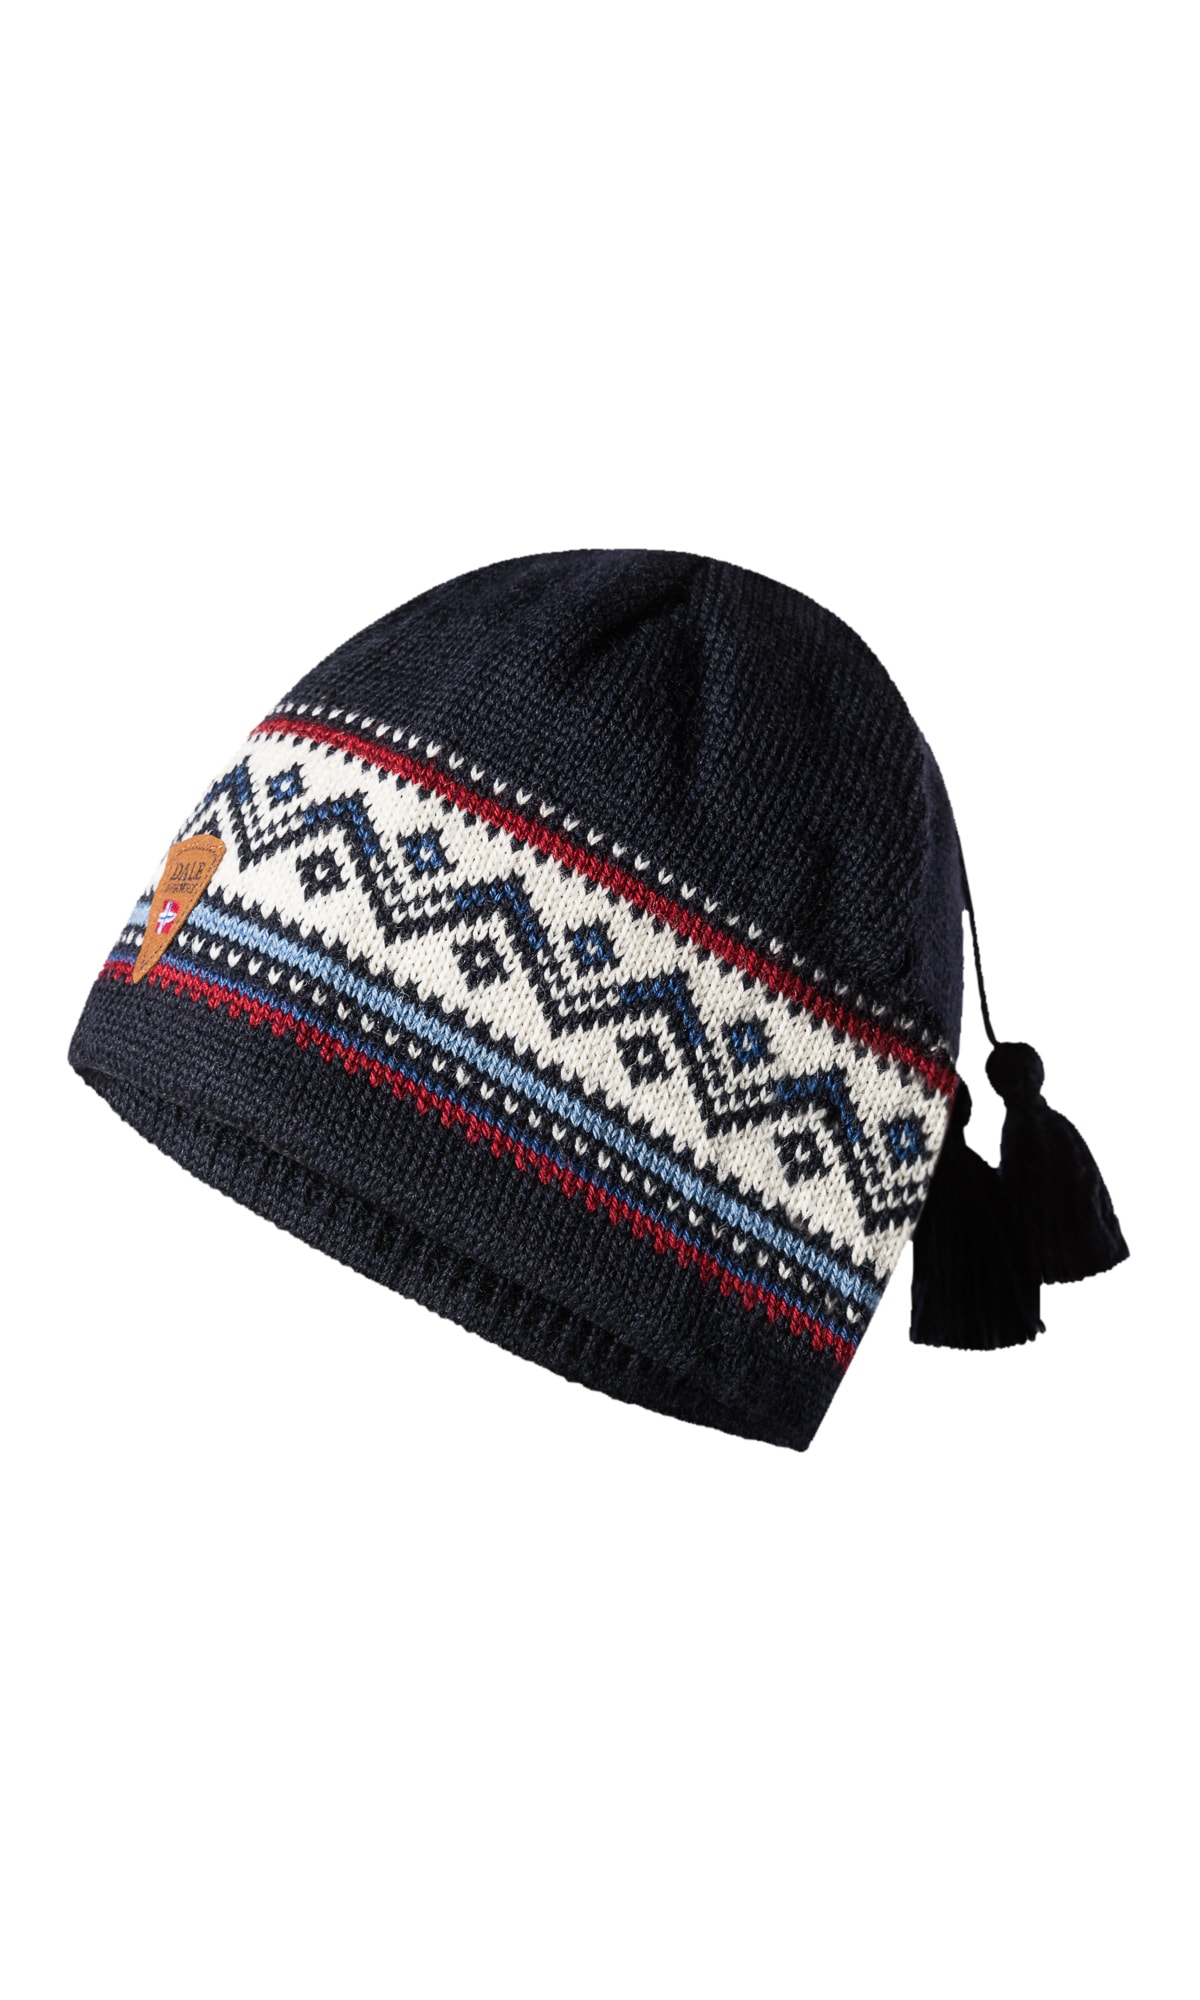 Vail Hat - Unisex - Navy/Red - Dale of Norway - Dale of Norway